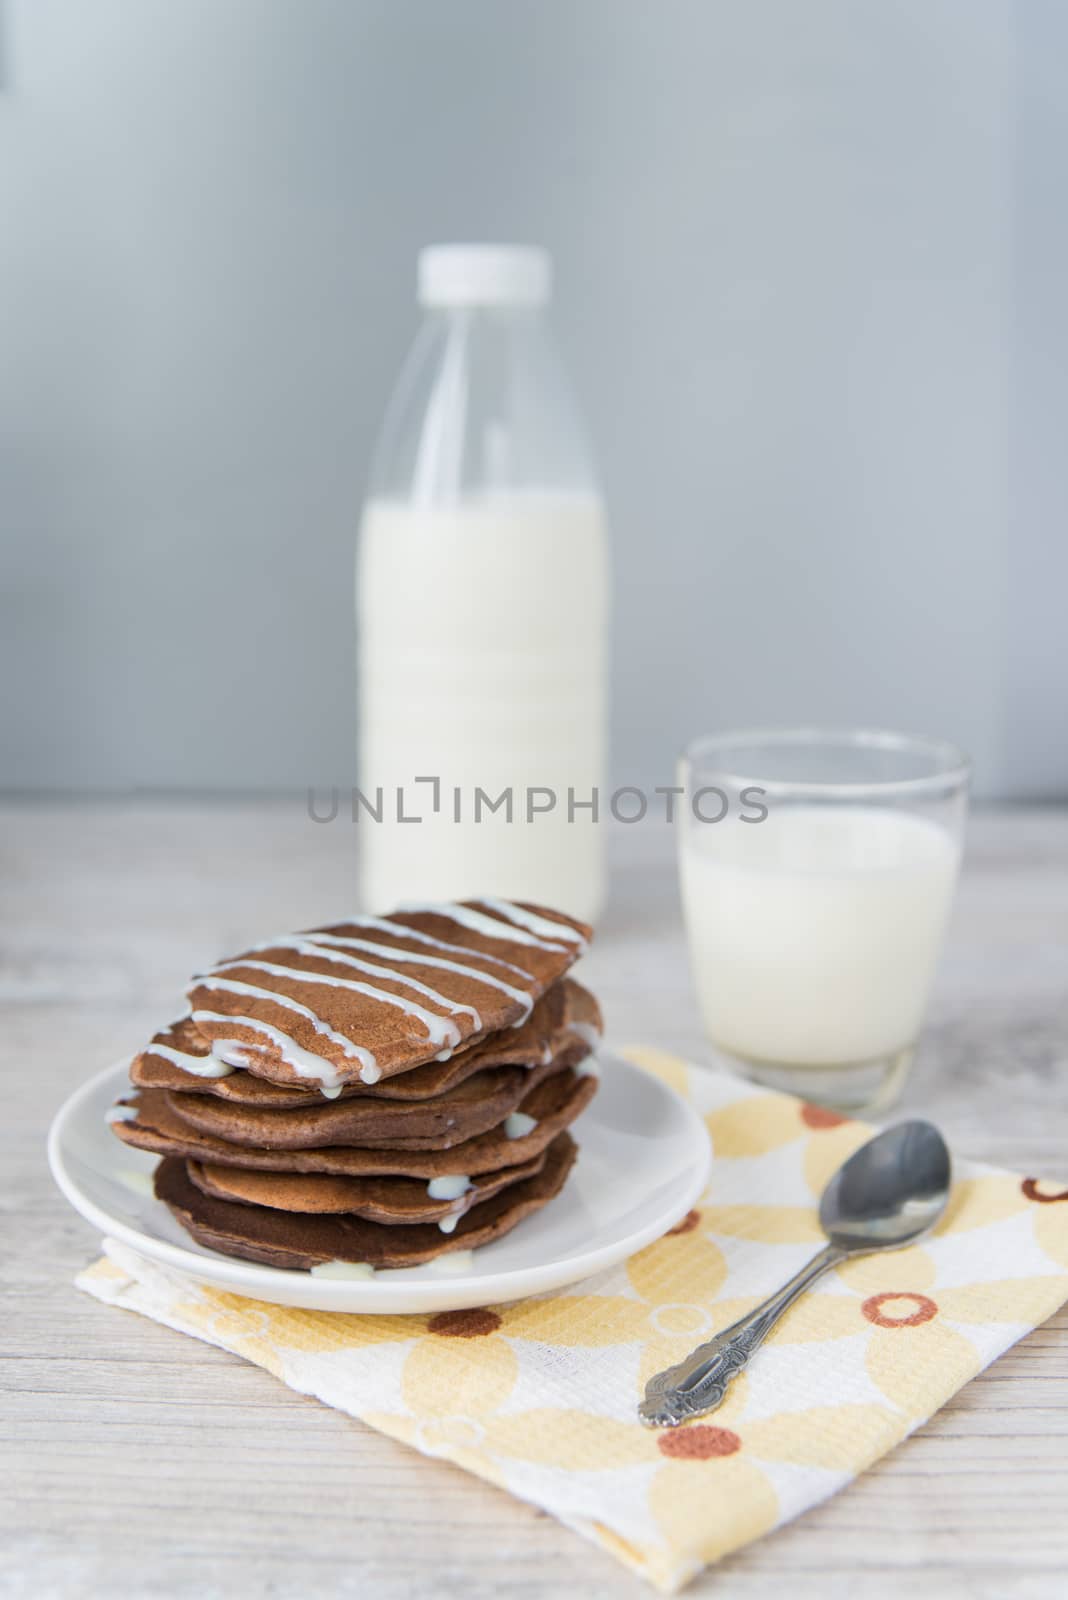 Chocolate pancakes with the glass and bottle of milk